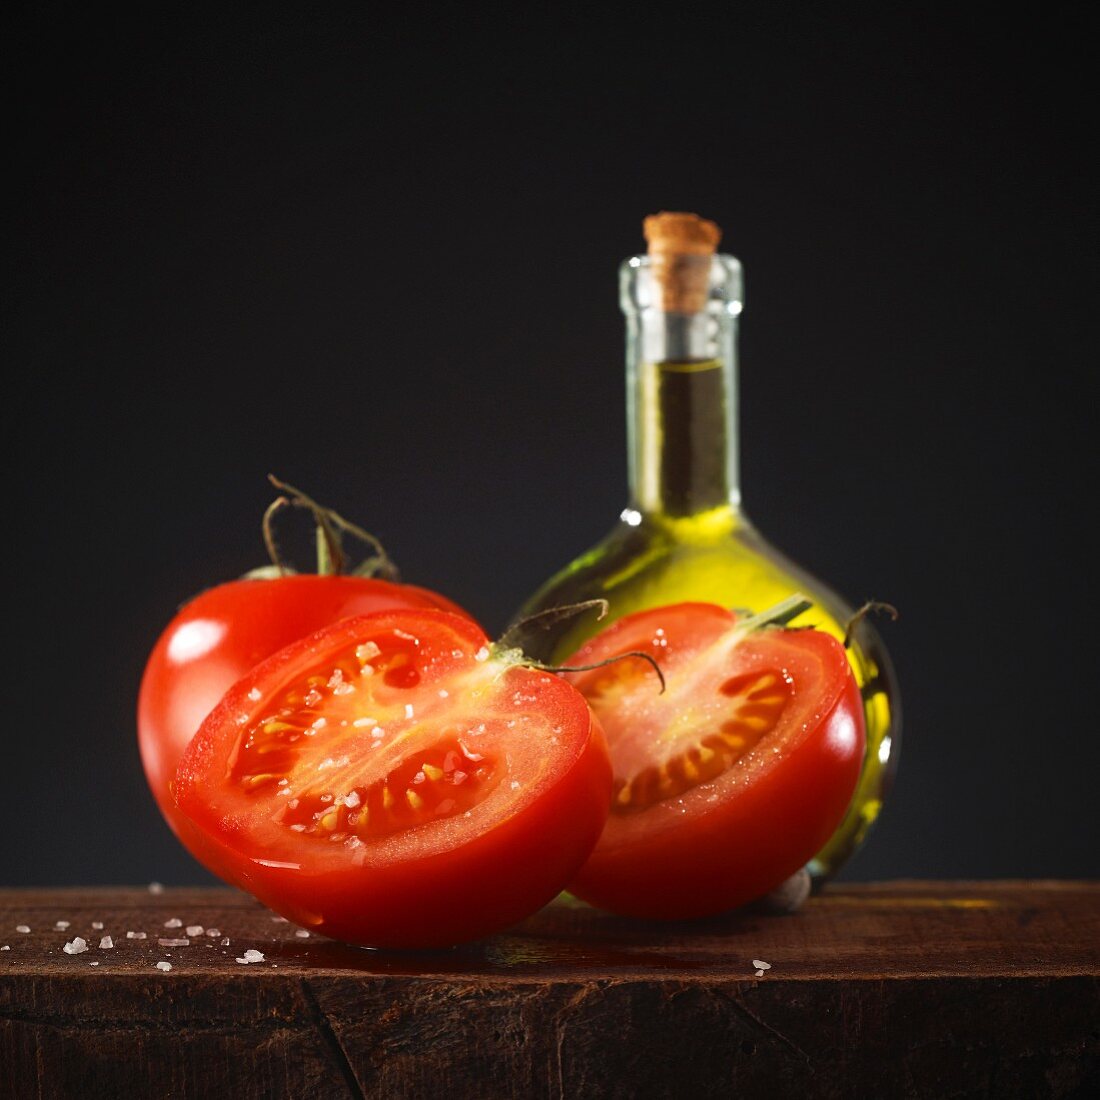 Fresh tomatoes in front of a bottle of olive oil